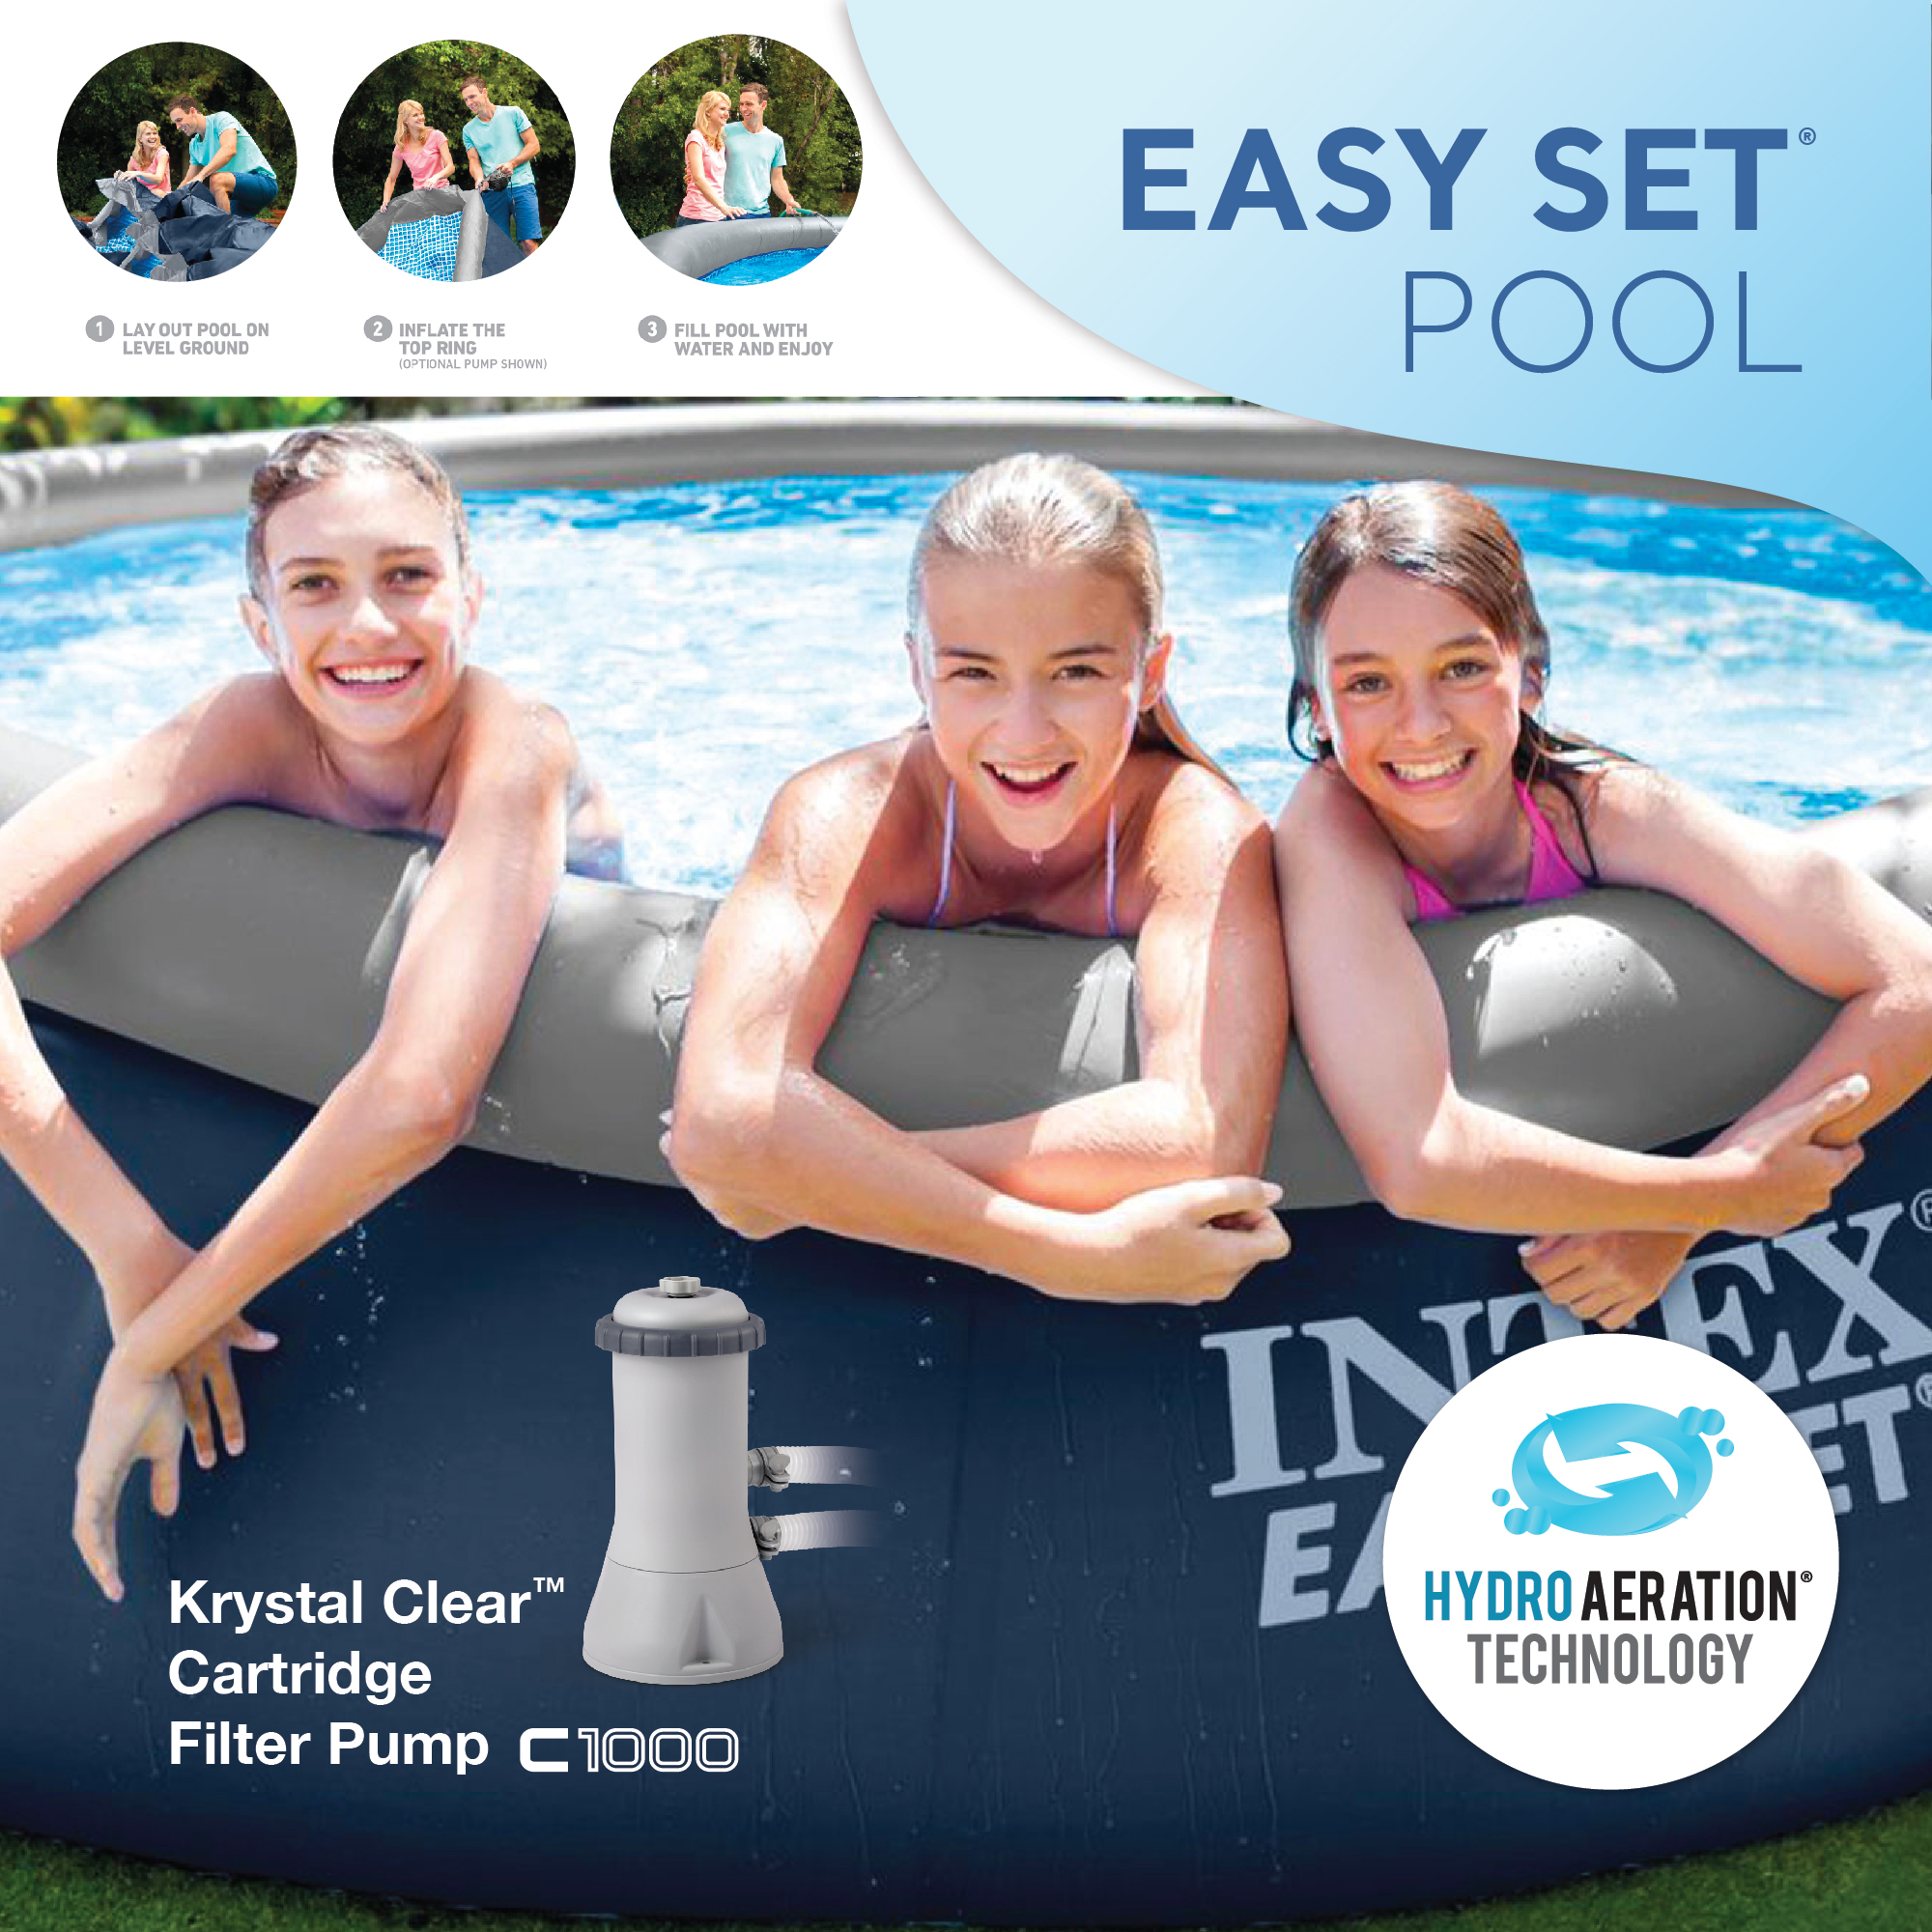 Intex Easy Set 15' x 42" Inflatable Outdoor Above Ground Swimming Pool Set - image 4 of 11